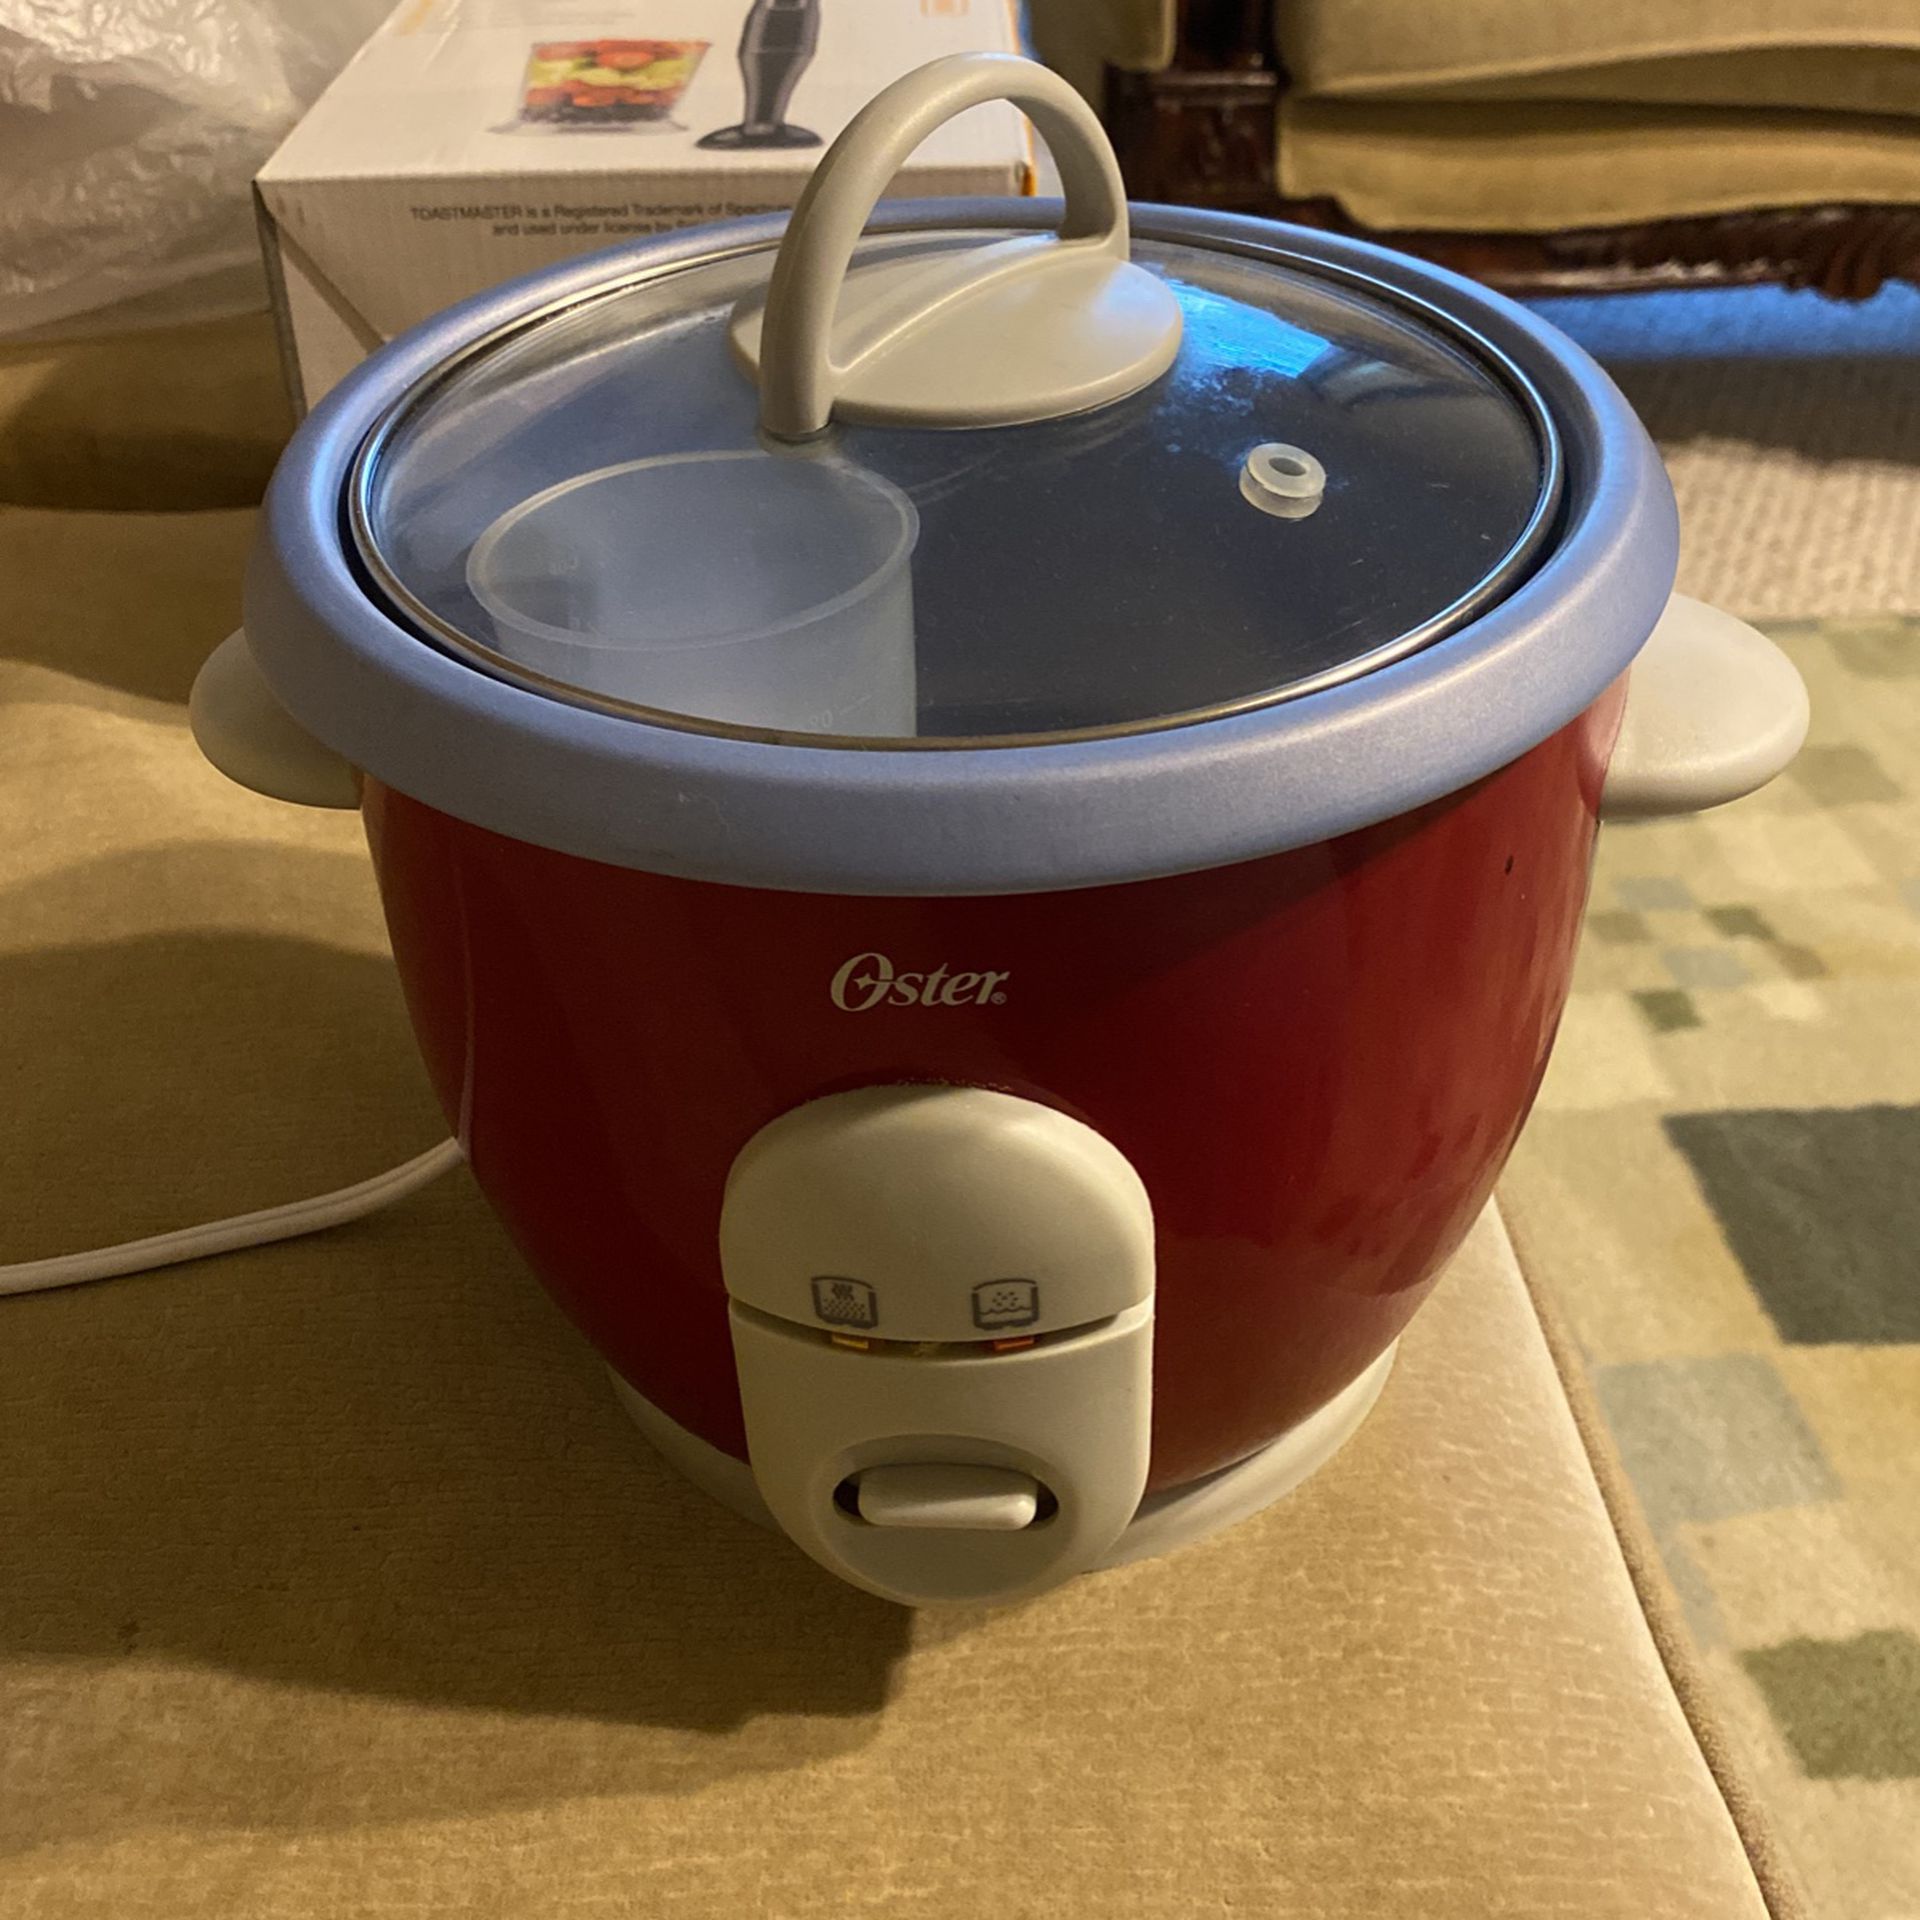 Oster Rice Cooker In A Very Good Condition for Sale in Humble, TX - OfferUp